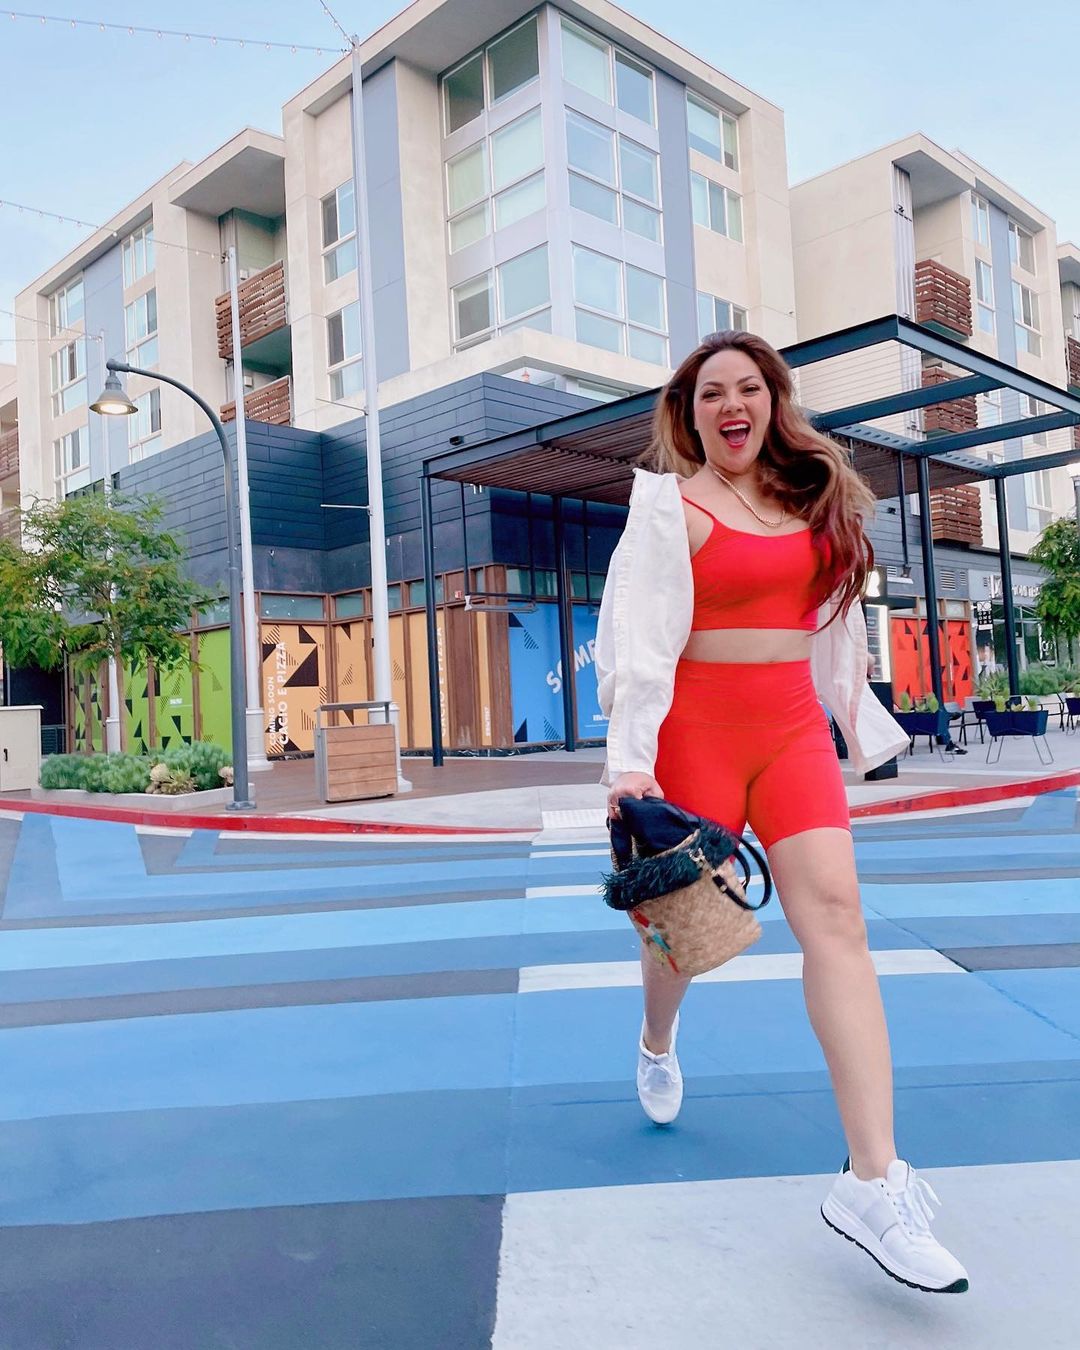 kc concepcion's outfits in los angeles